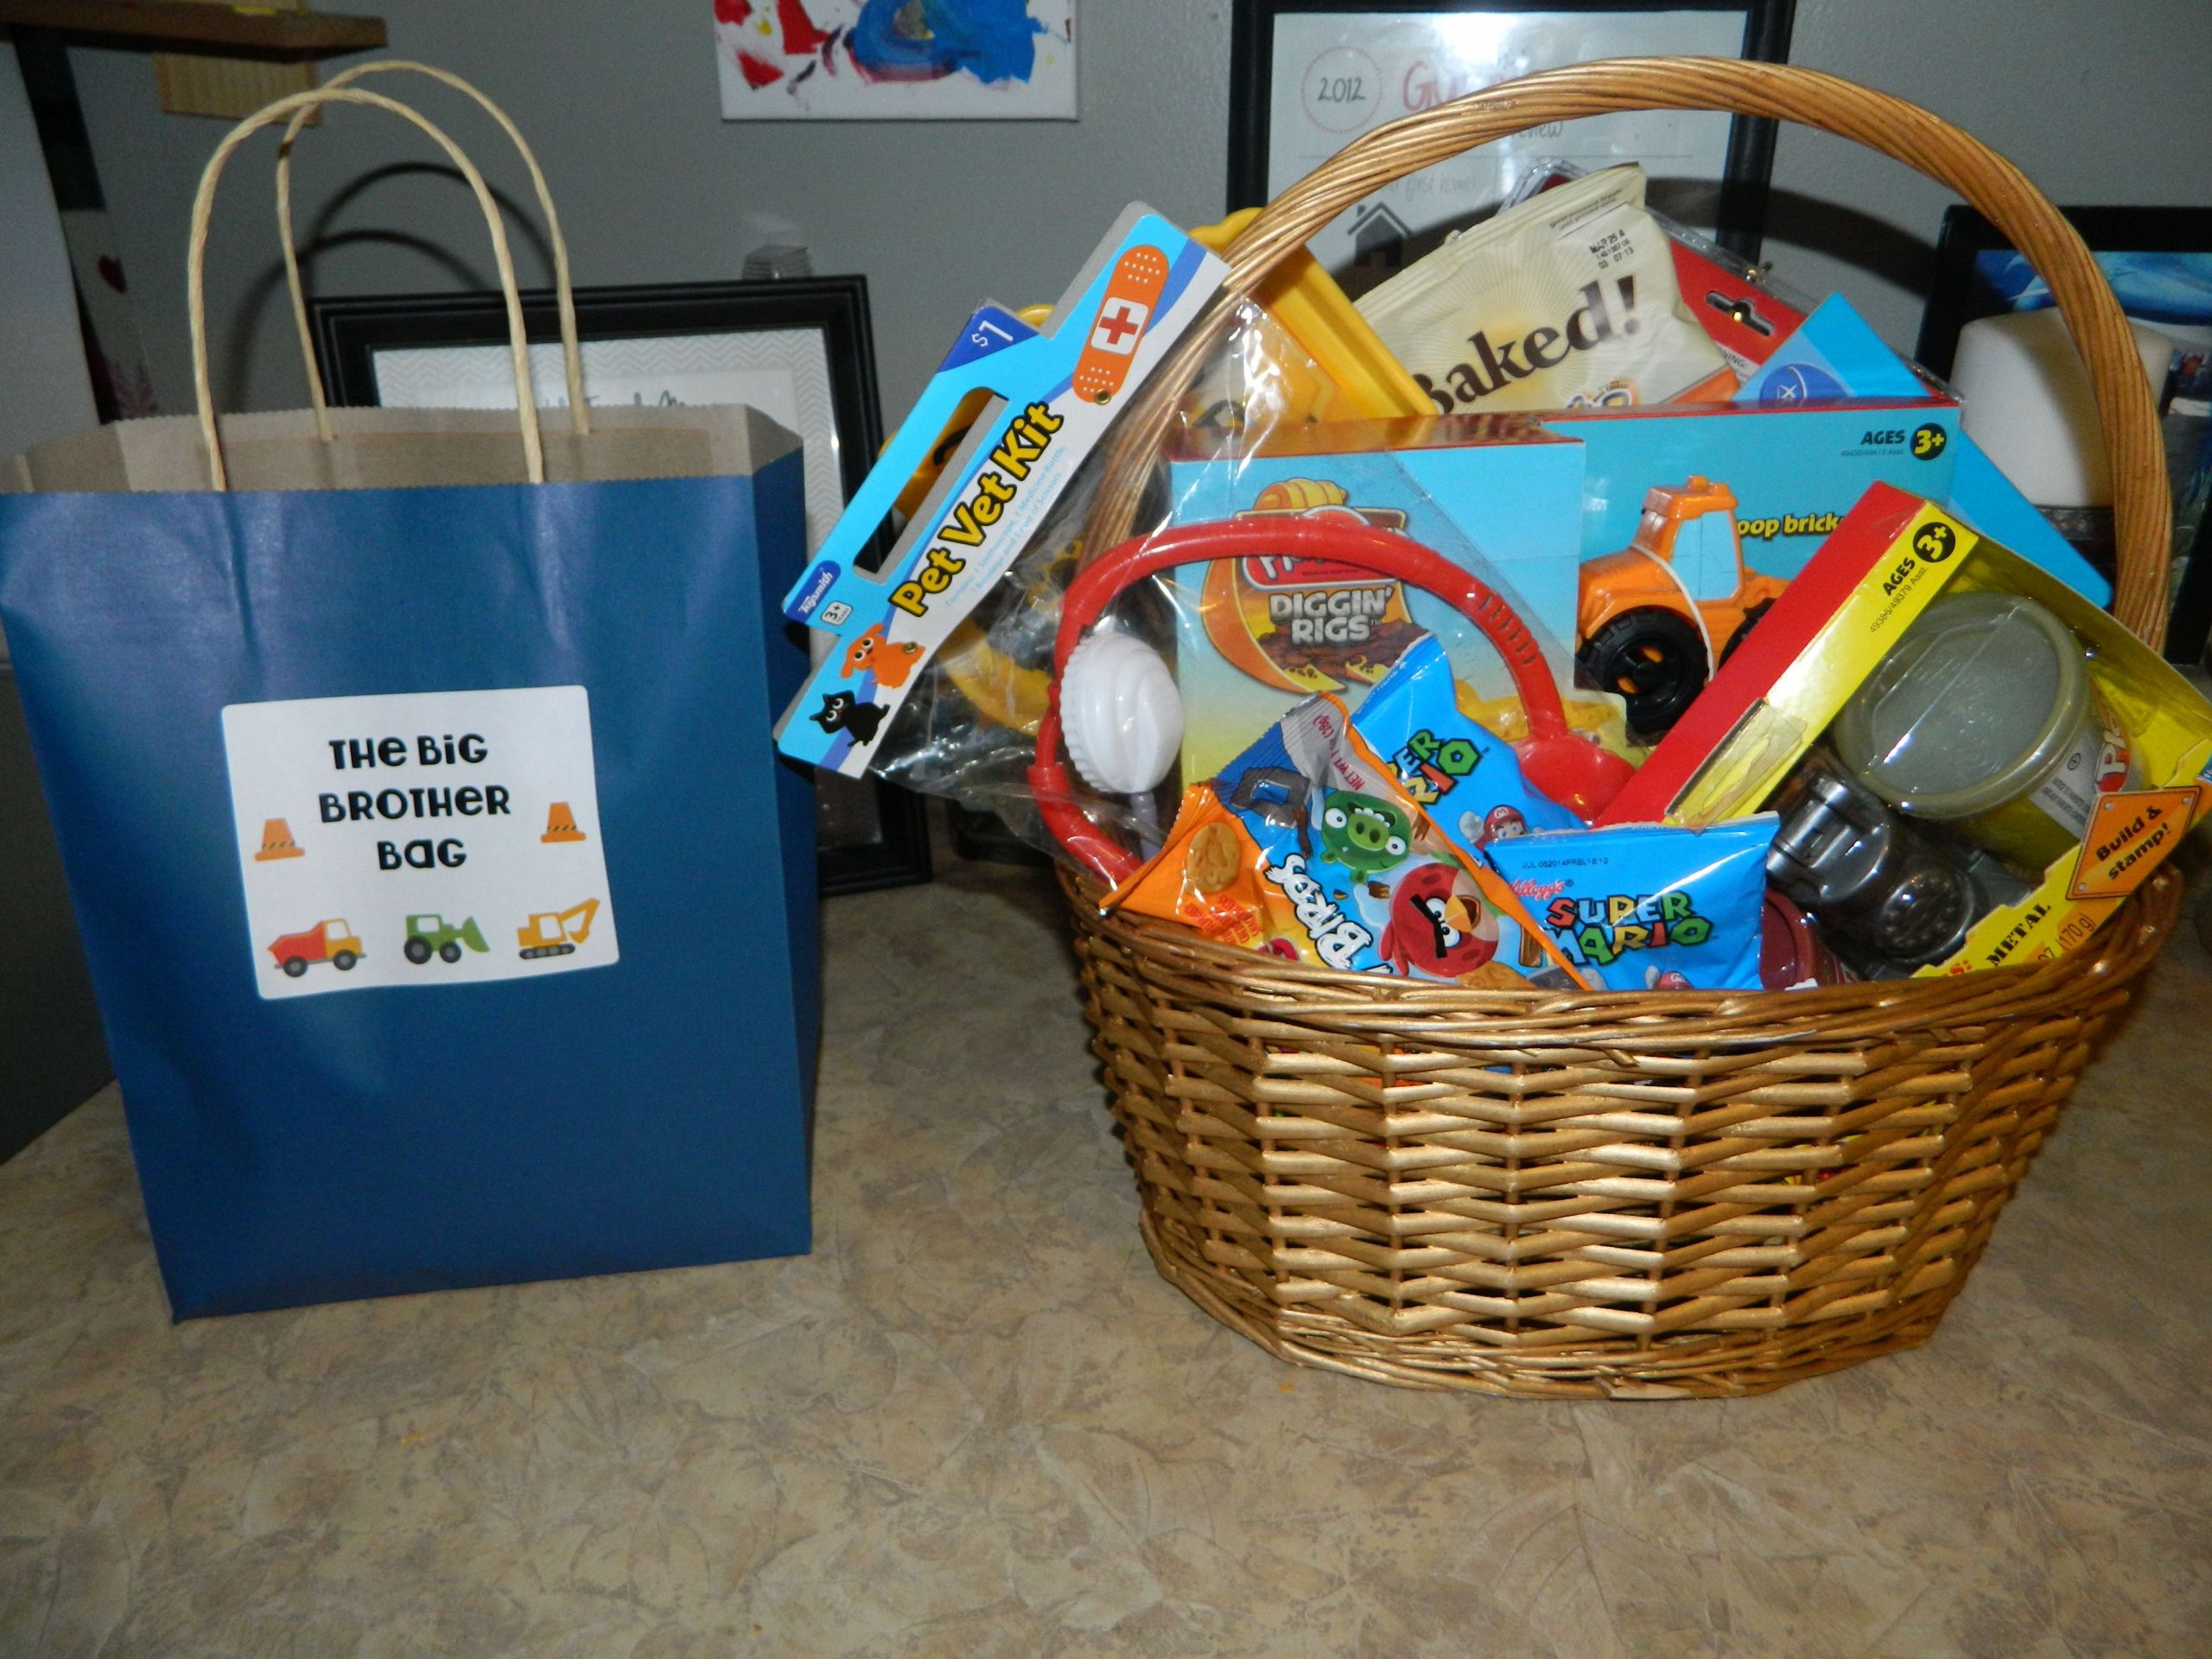 Big Brother Gift Ideas From Baby
 Big Brother t basket Made a basket for my 3 year old